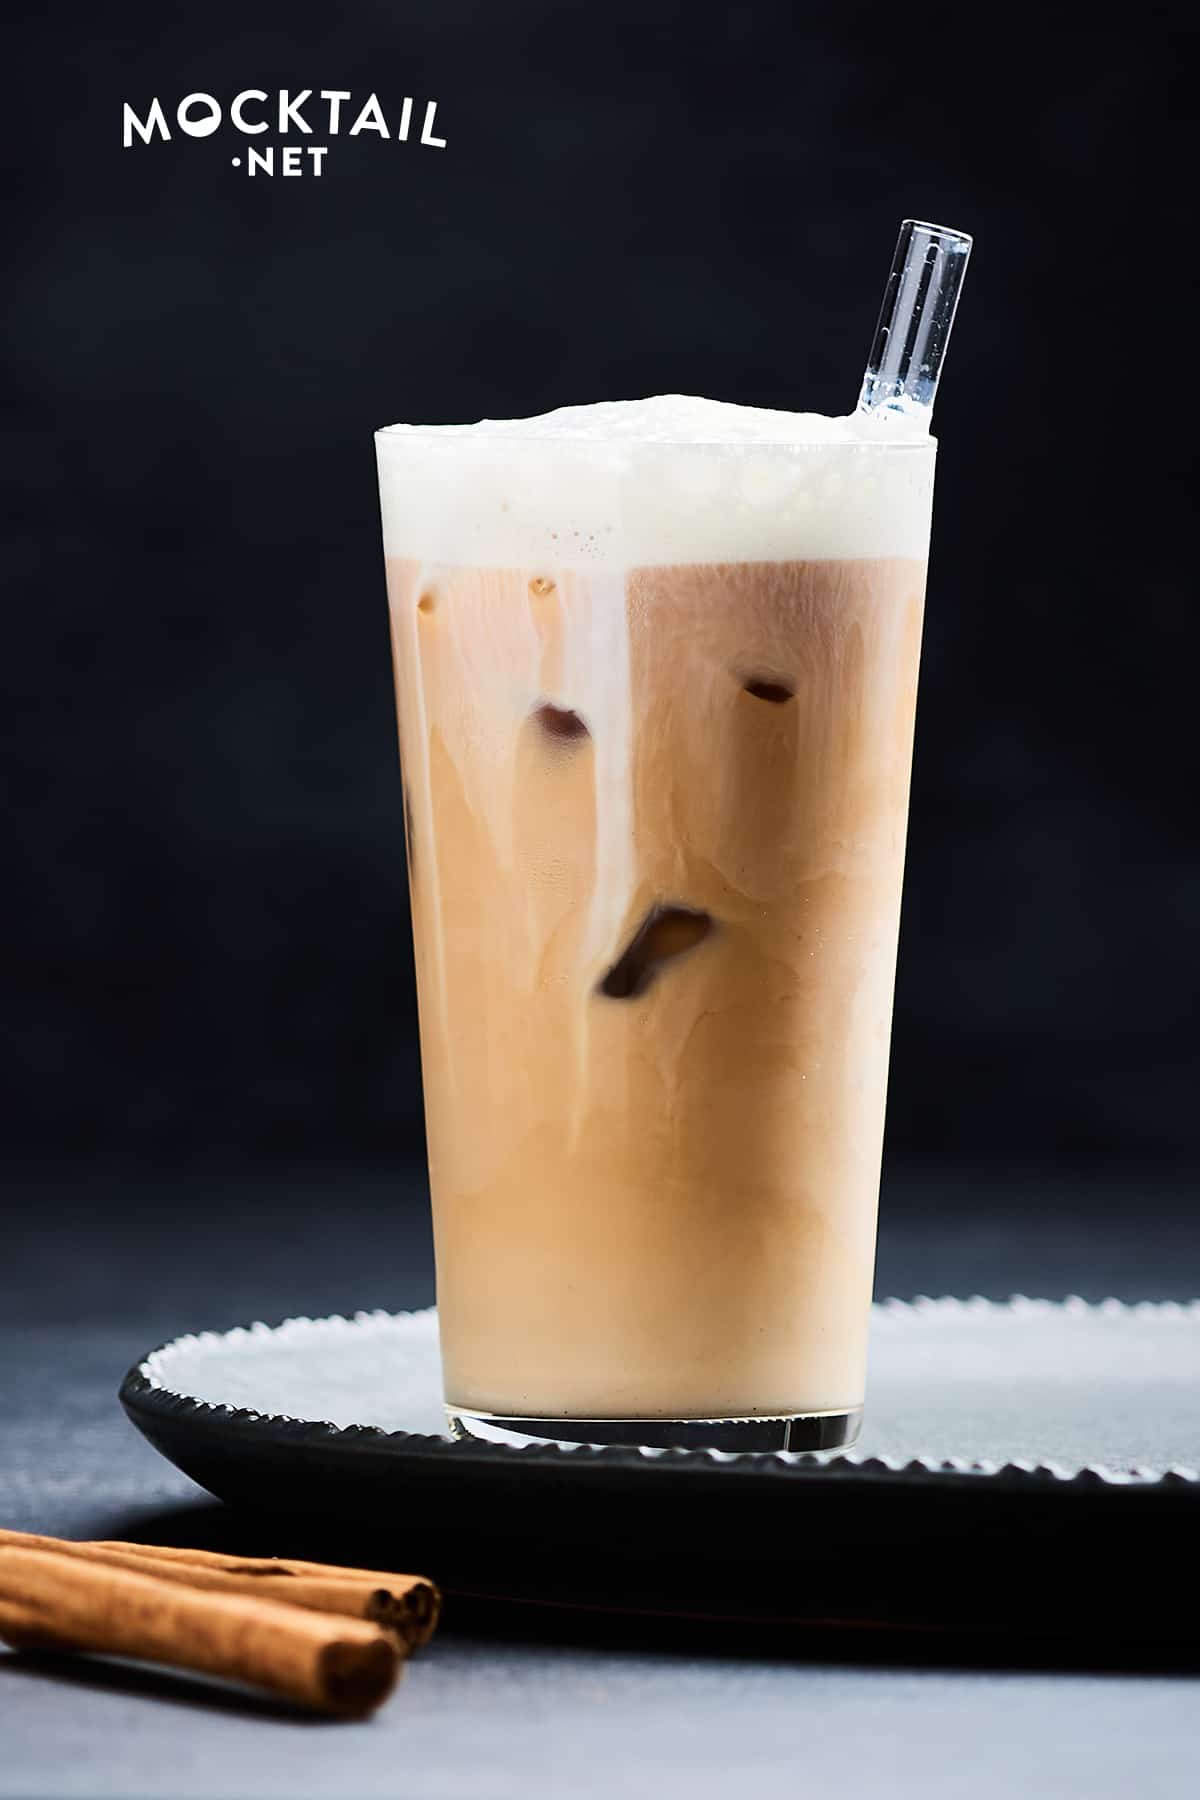 How to Make an Iced Cappuccino